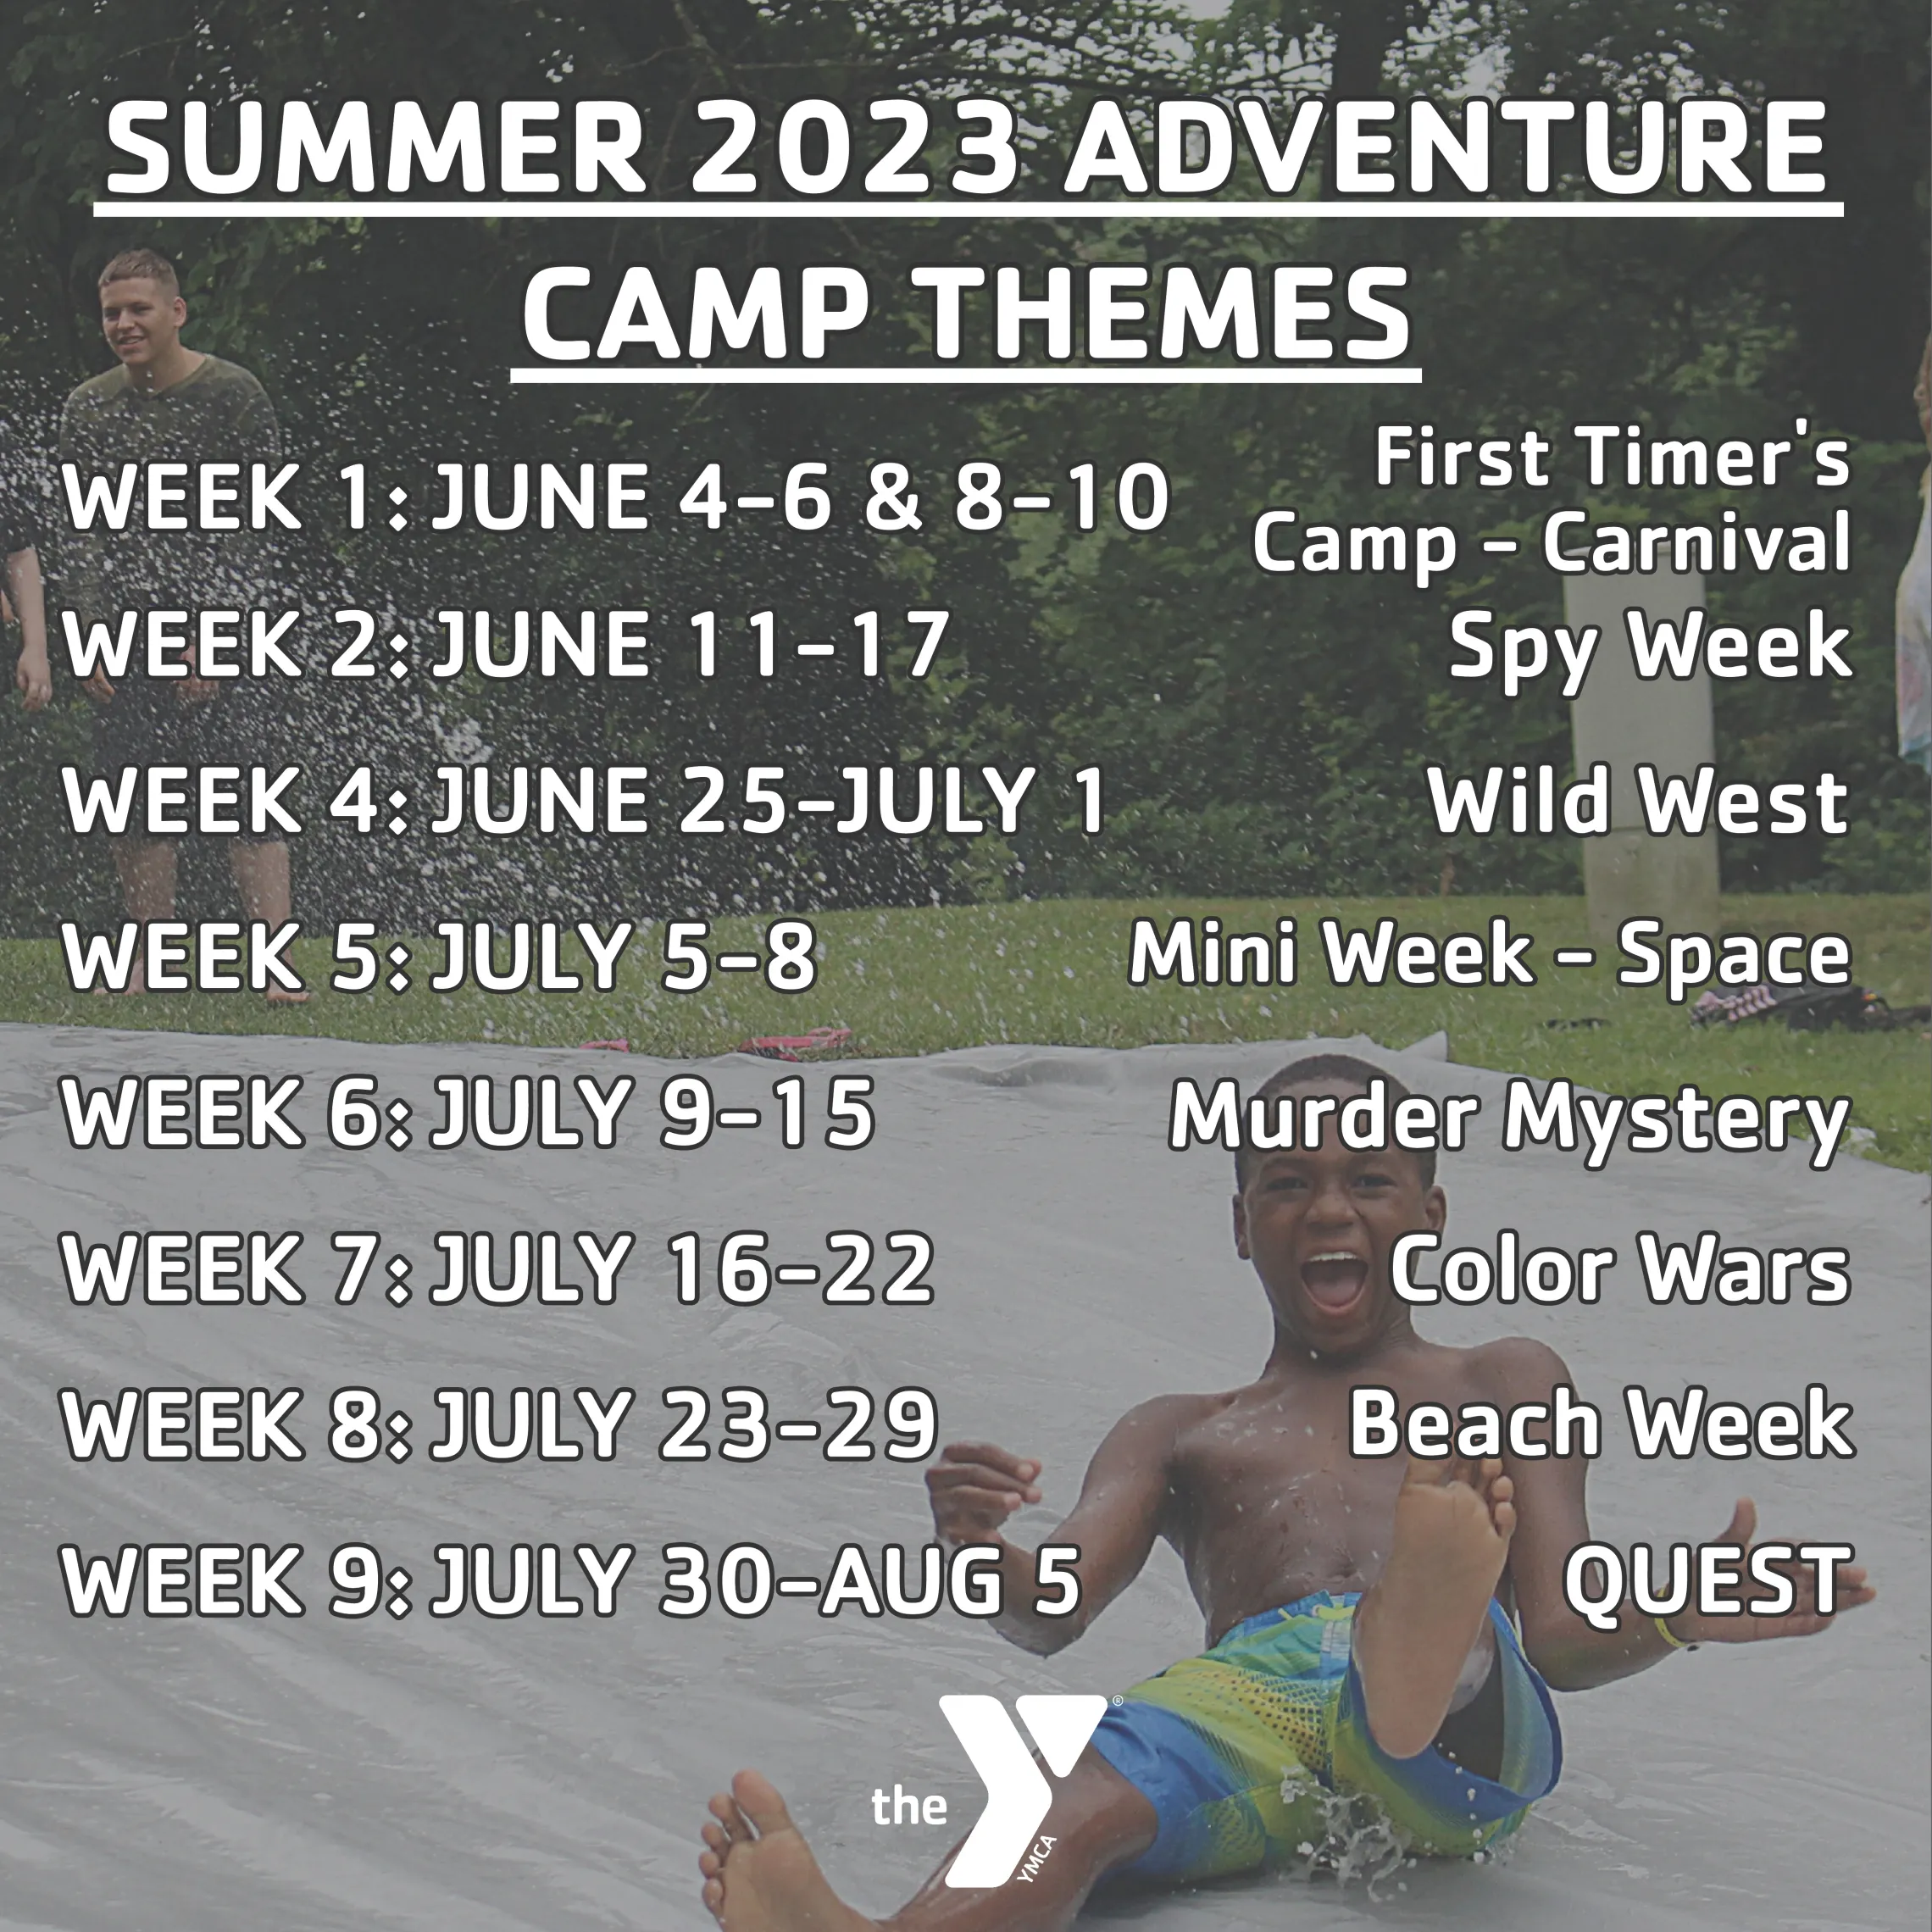 List of theme weeks for 2023